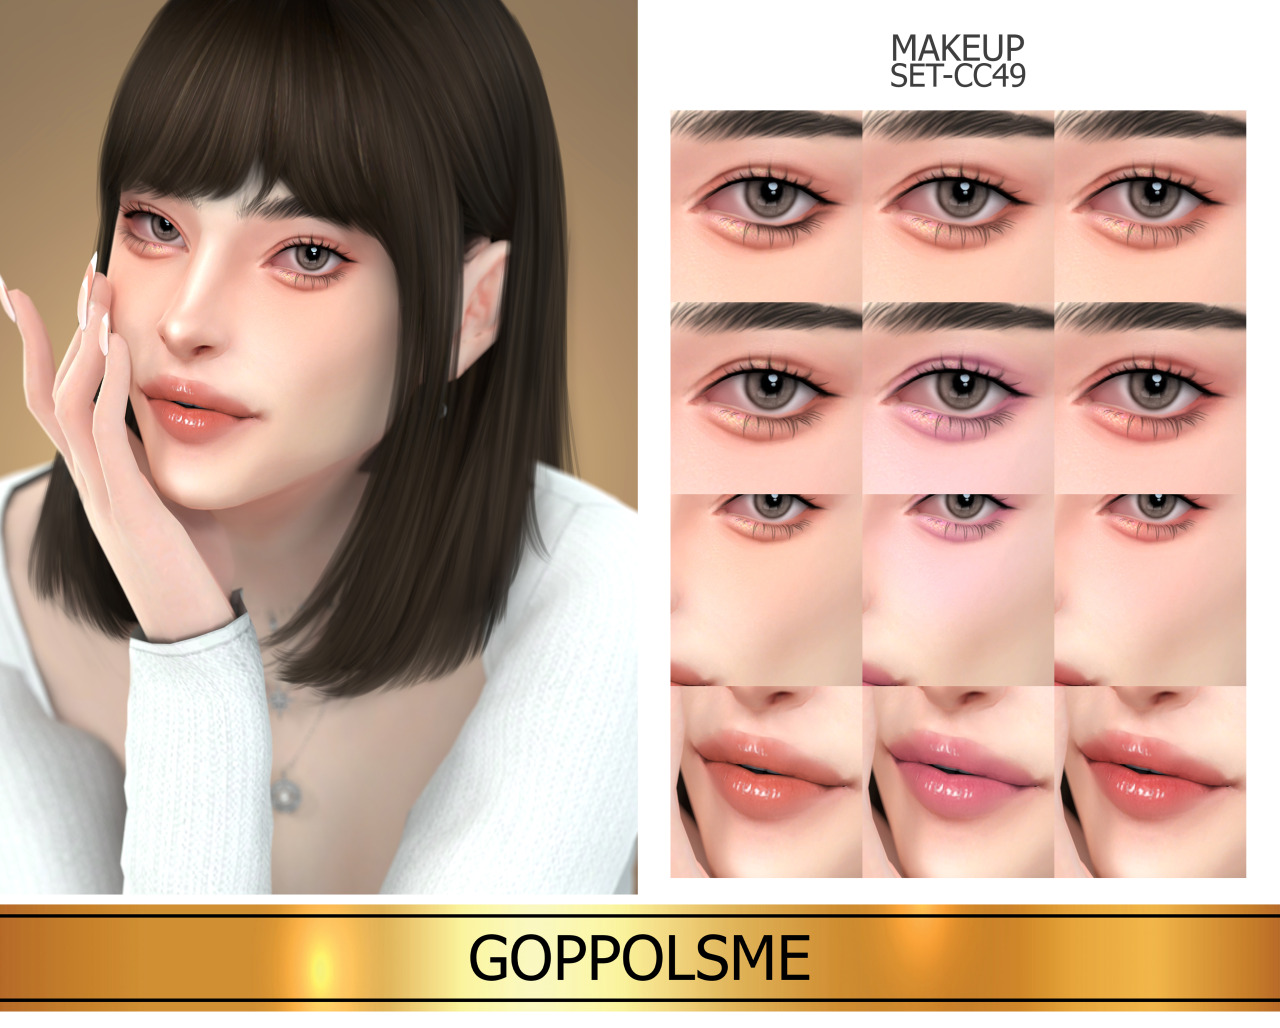 GPME-GOLD MAKEUP SET CC49Download at GOPPOLSME patreon ( No ad )Access to Exclusive GOPPOLSME Patreon onlyHQ mod compatibleThank for support me  ❤  Thanks for all CC creators ❤Hope you like it .Please don’t re-upload #goppolsme#thesims4#sims4cc#sims4ccfinds#sims4makeup#s4cc#s4ccfinds#s4makeup